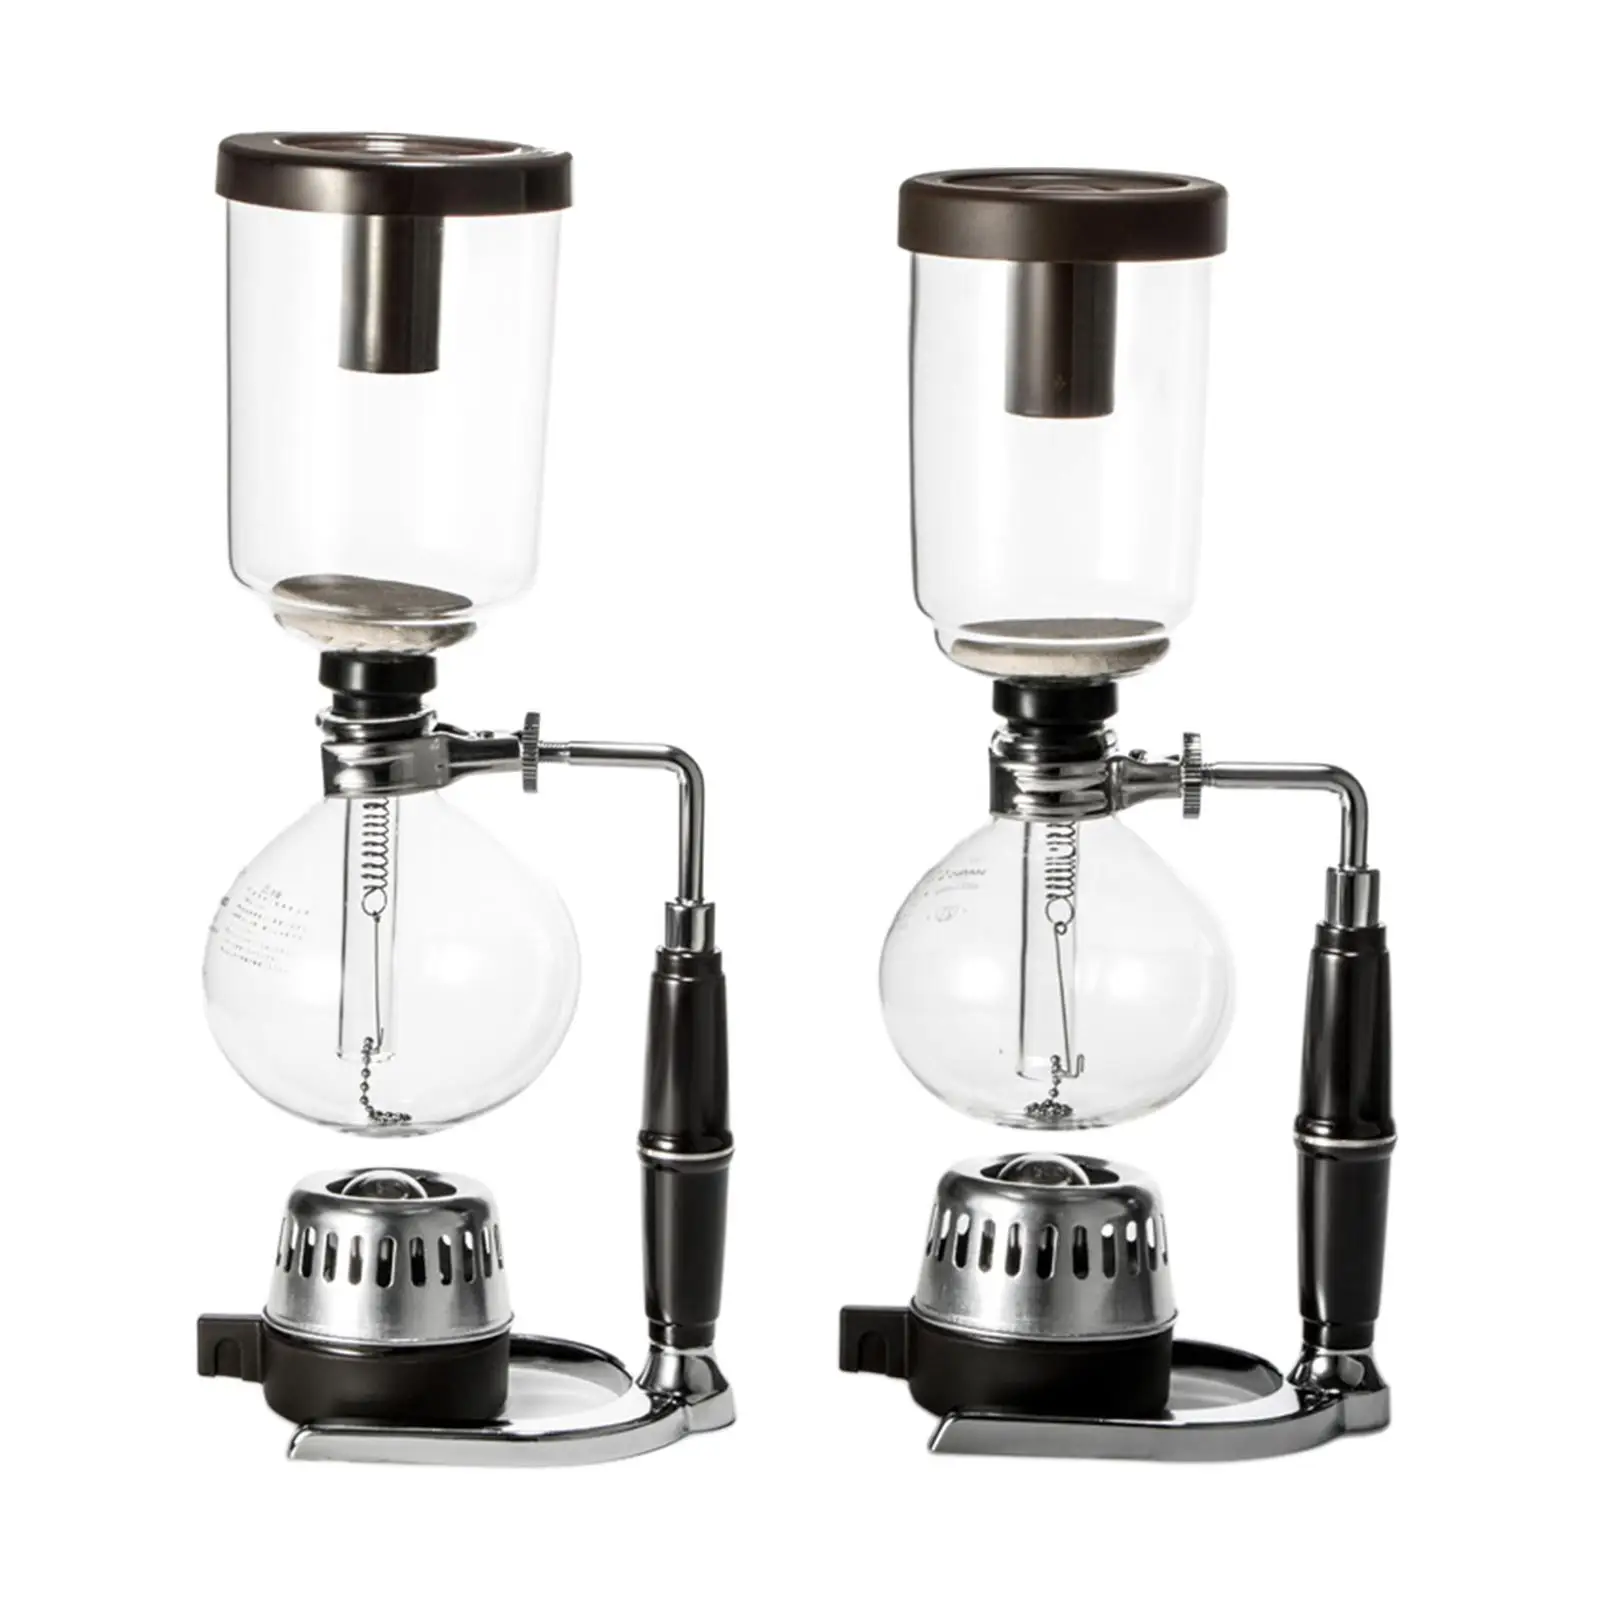 Siphon Coffee Maker 3/5 Cups Household Vacuum Coffee Makers Siphon Pot for Office Home Coffee Shop Kitchen Coffee Lovers Gift